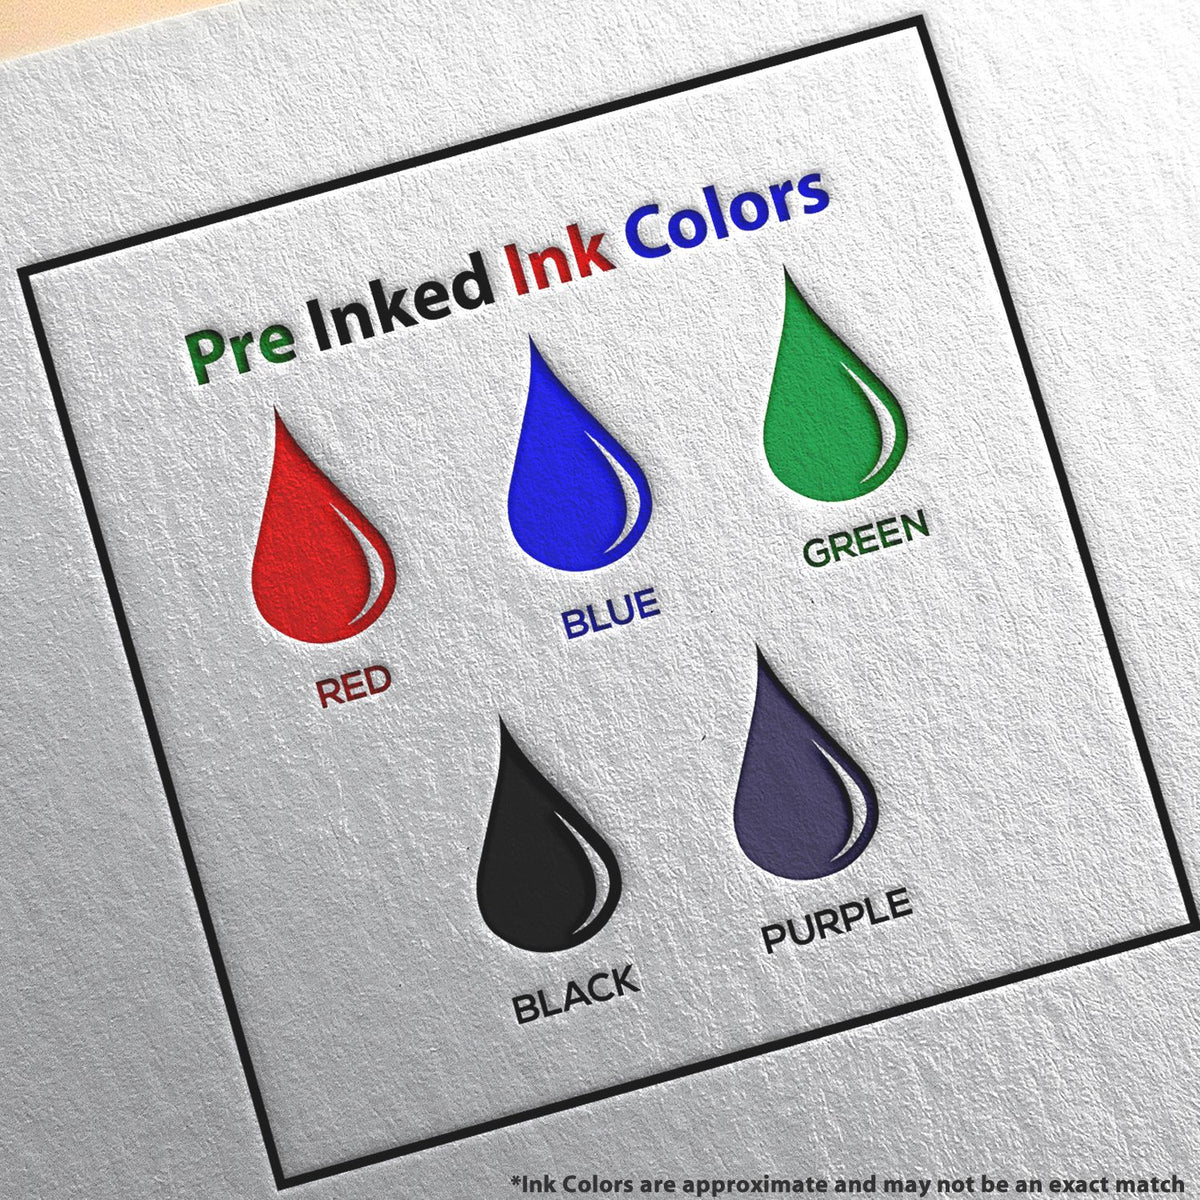 A picture showing the different ink colors or hues available for the Slim Pre-Inked Alaska Landscape Architect Seal Stamp product.